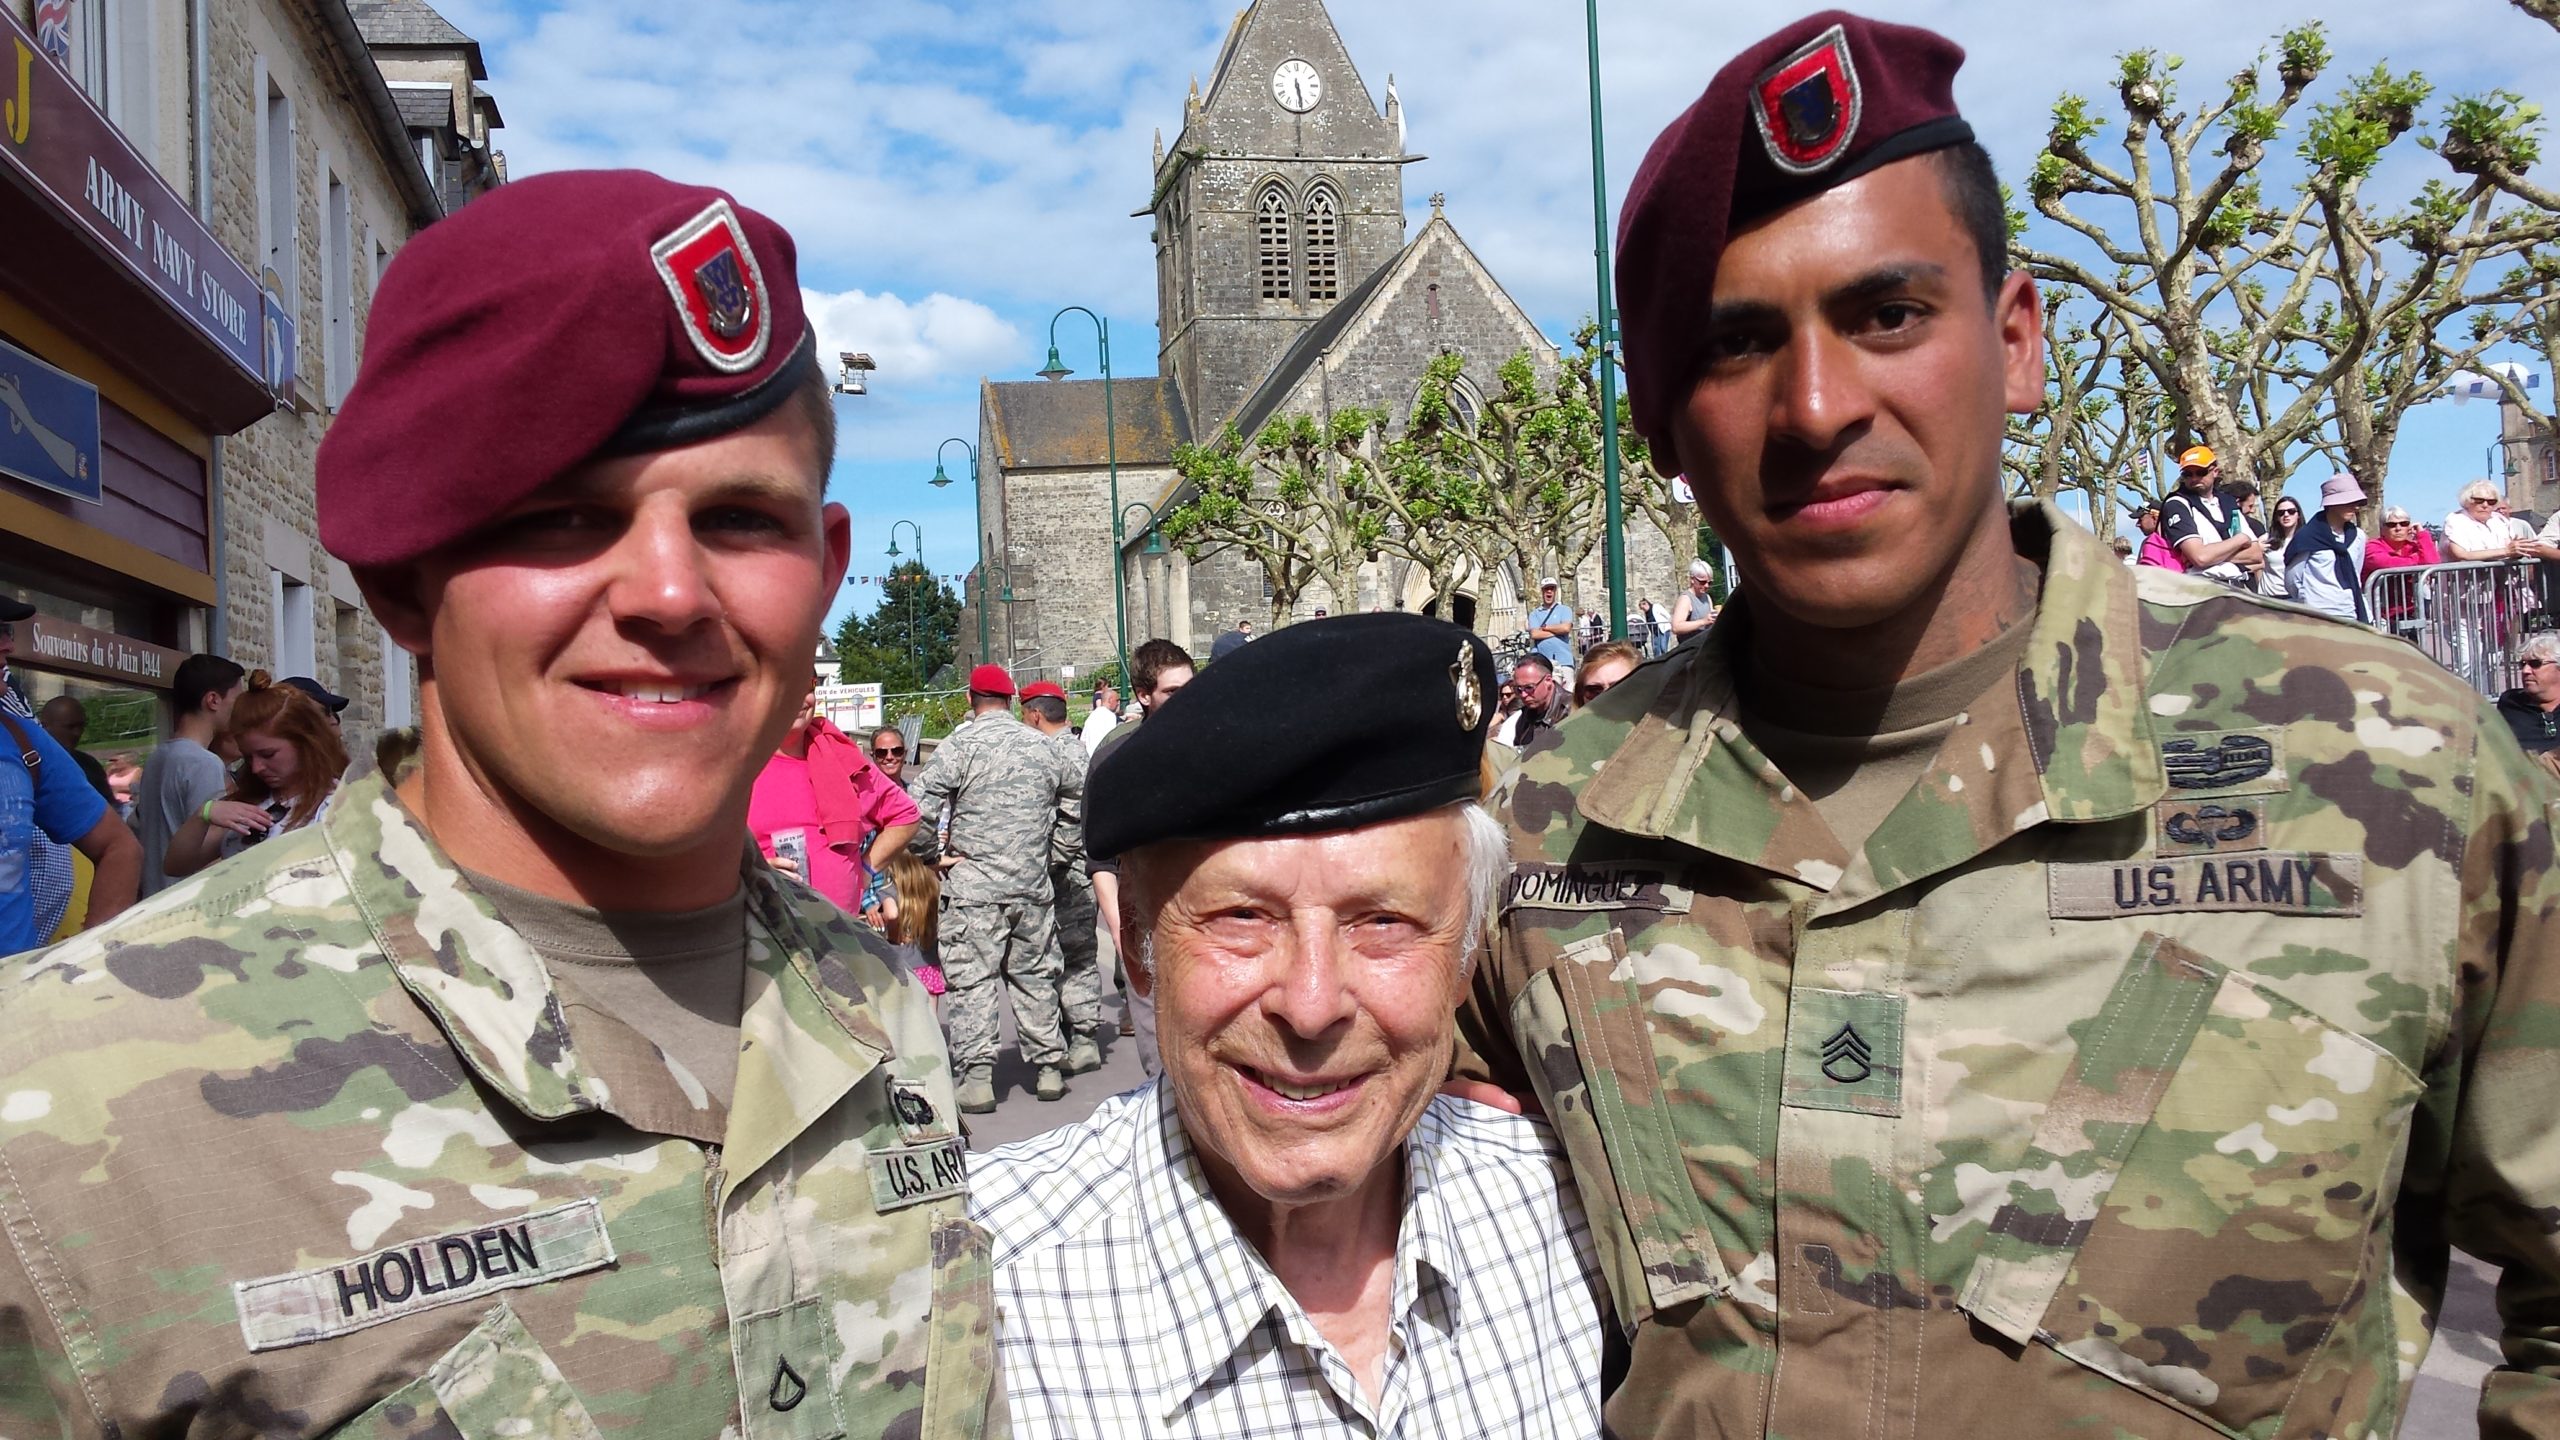 Charley and American paratroopers in St. Mere Eglise, Normandy, France for D-Day celebrations 2017